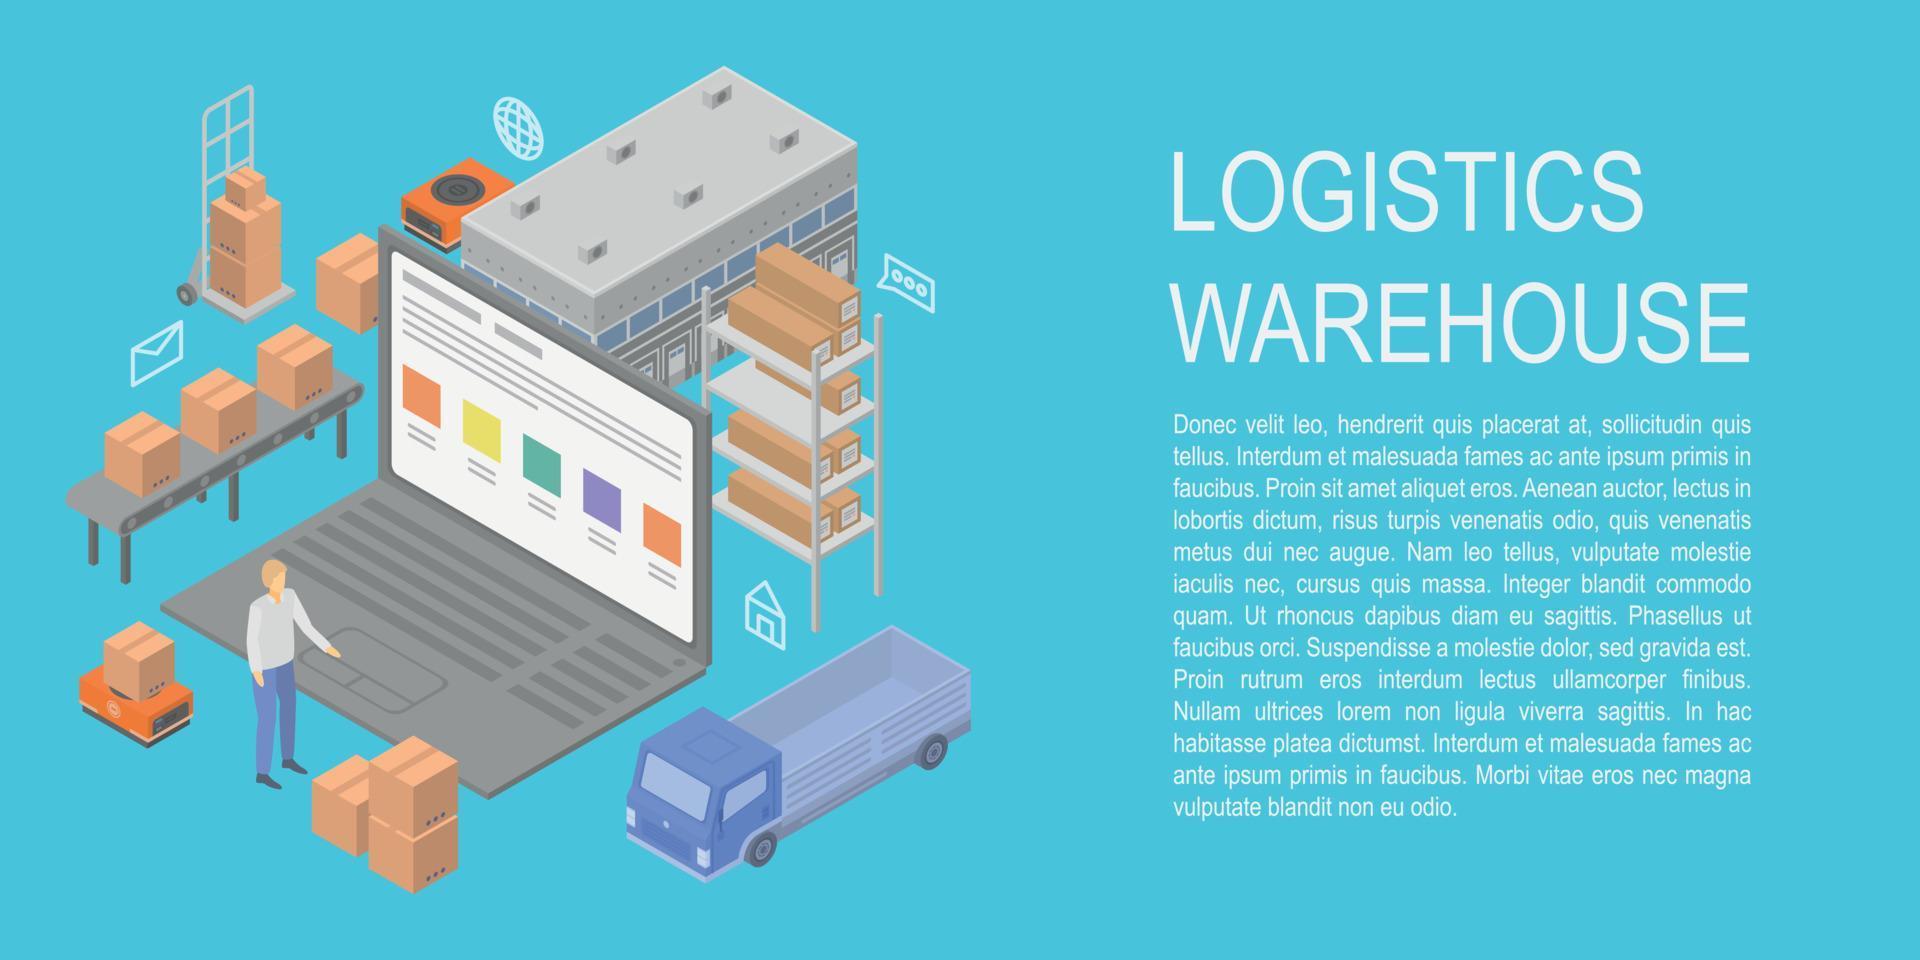 Logistics warehouse concept banner, isometric style vector